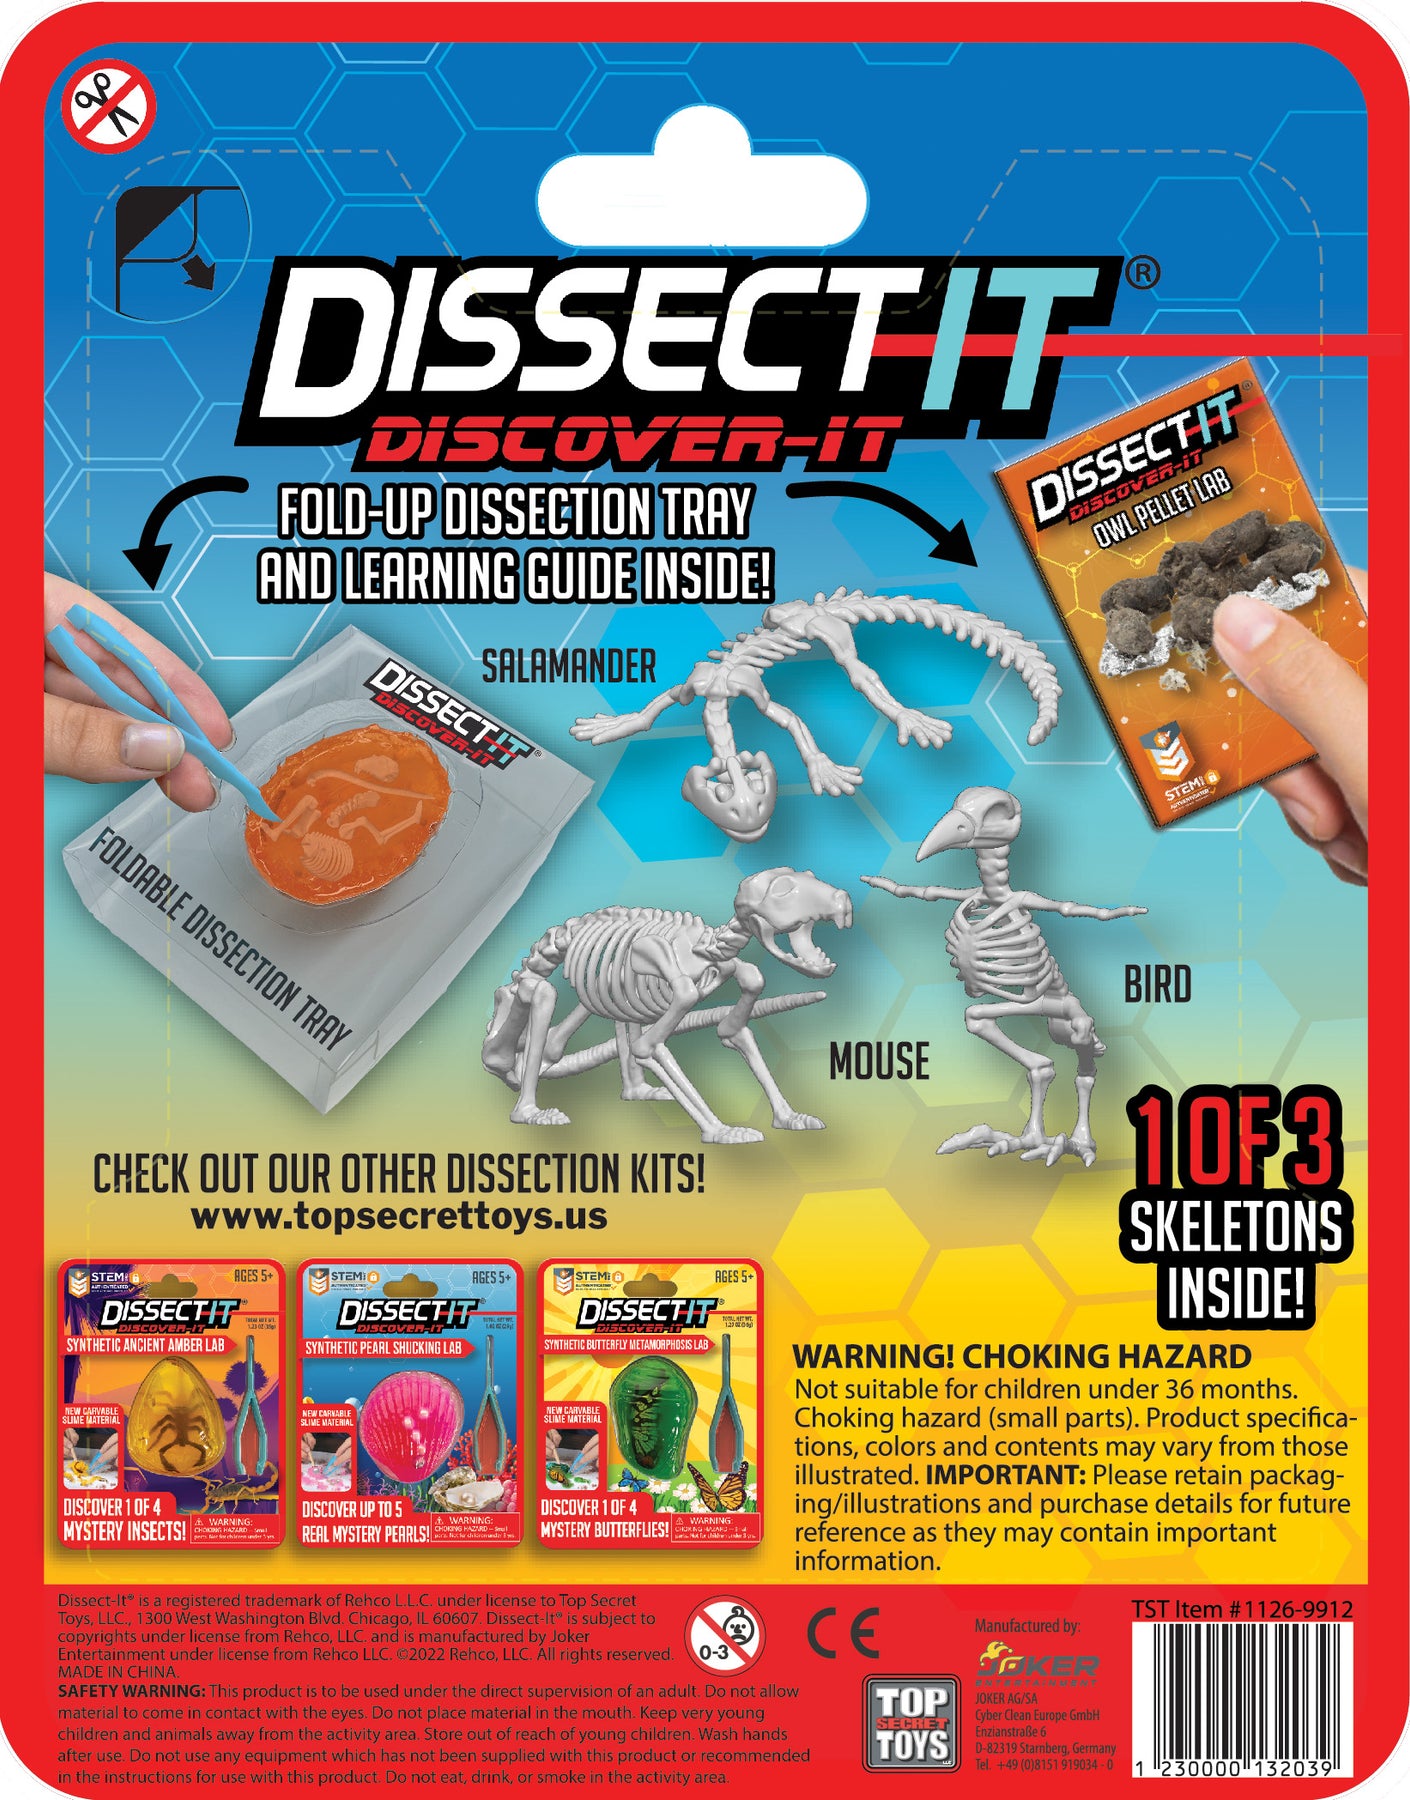 Owl Pellet Dissection Kit | Home Science Tools